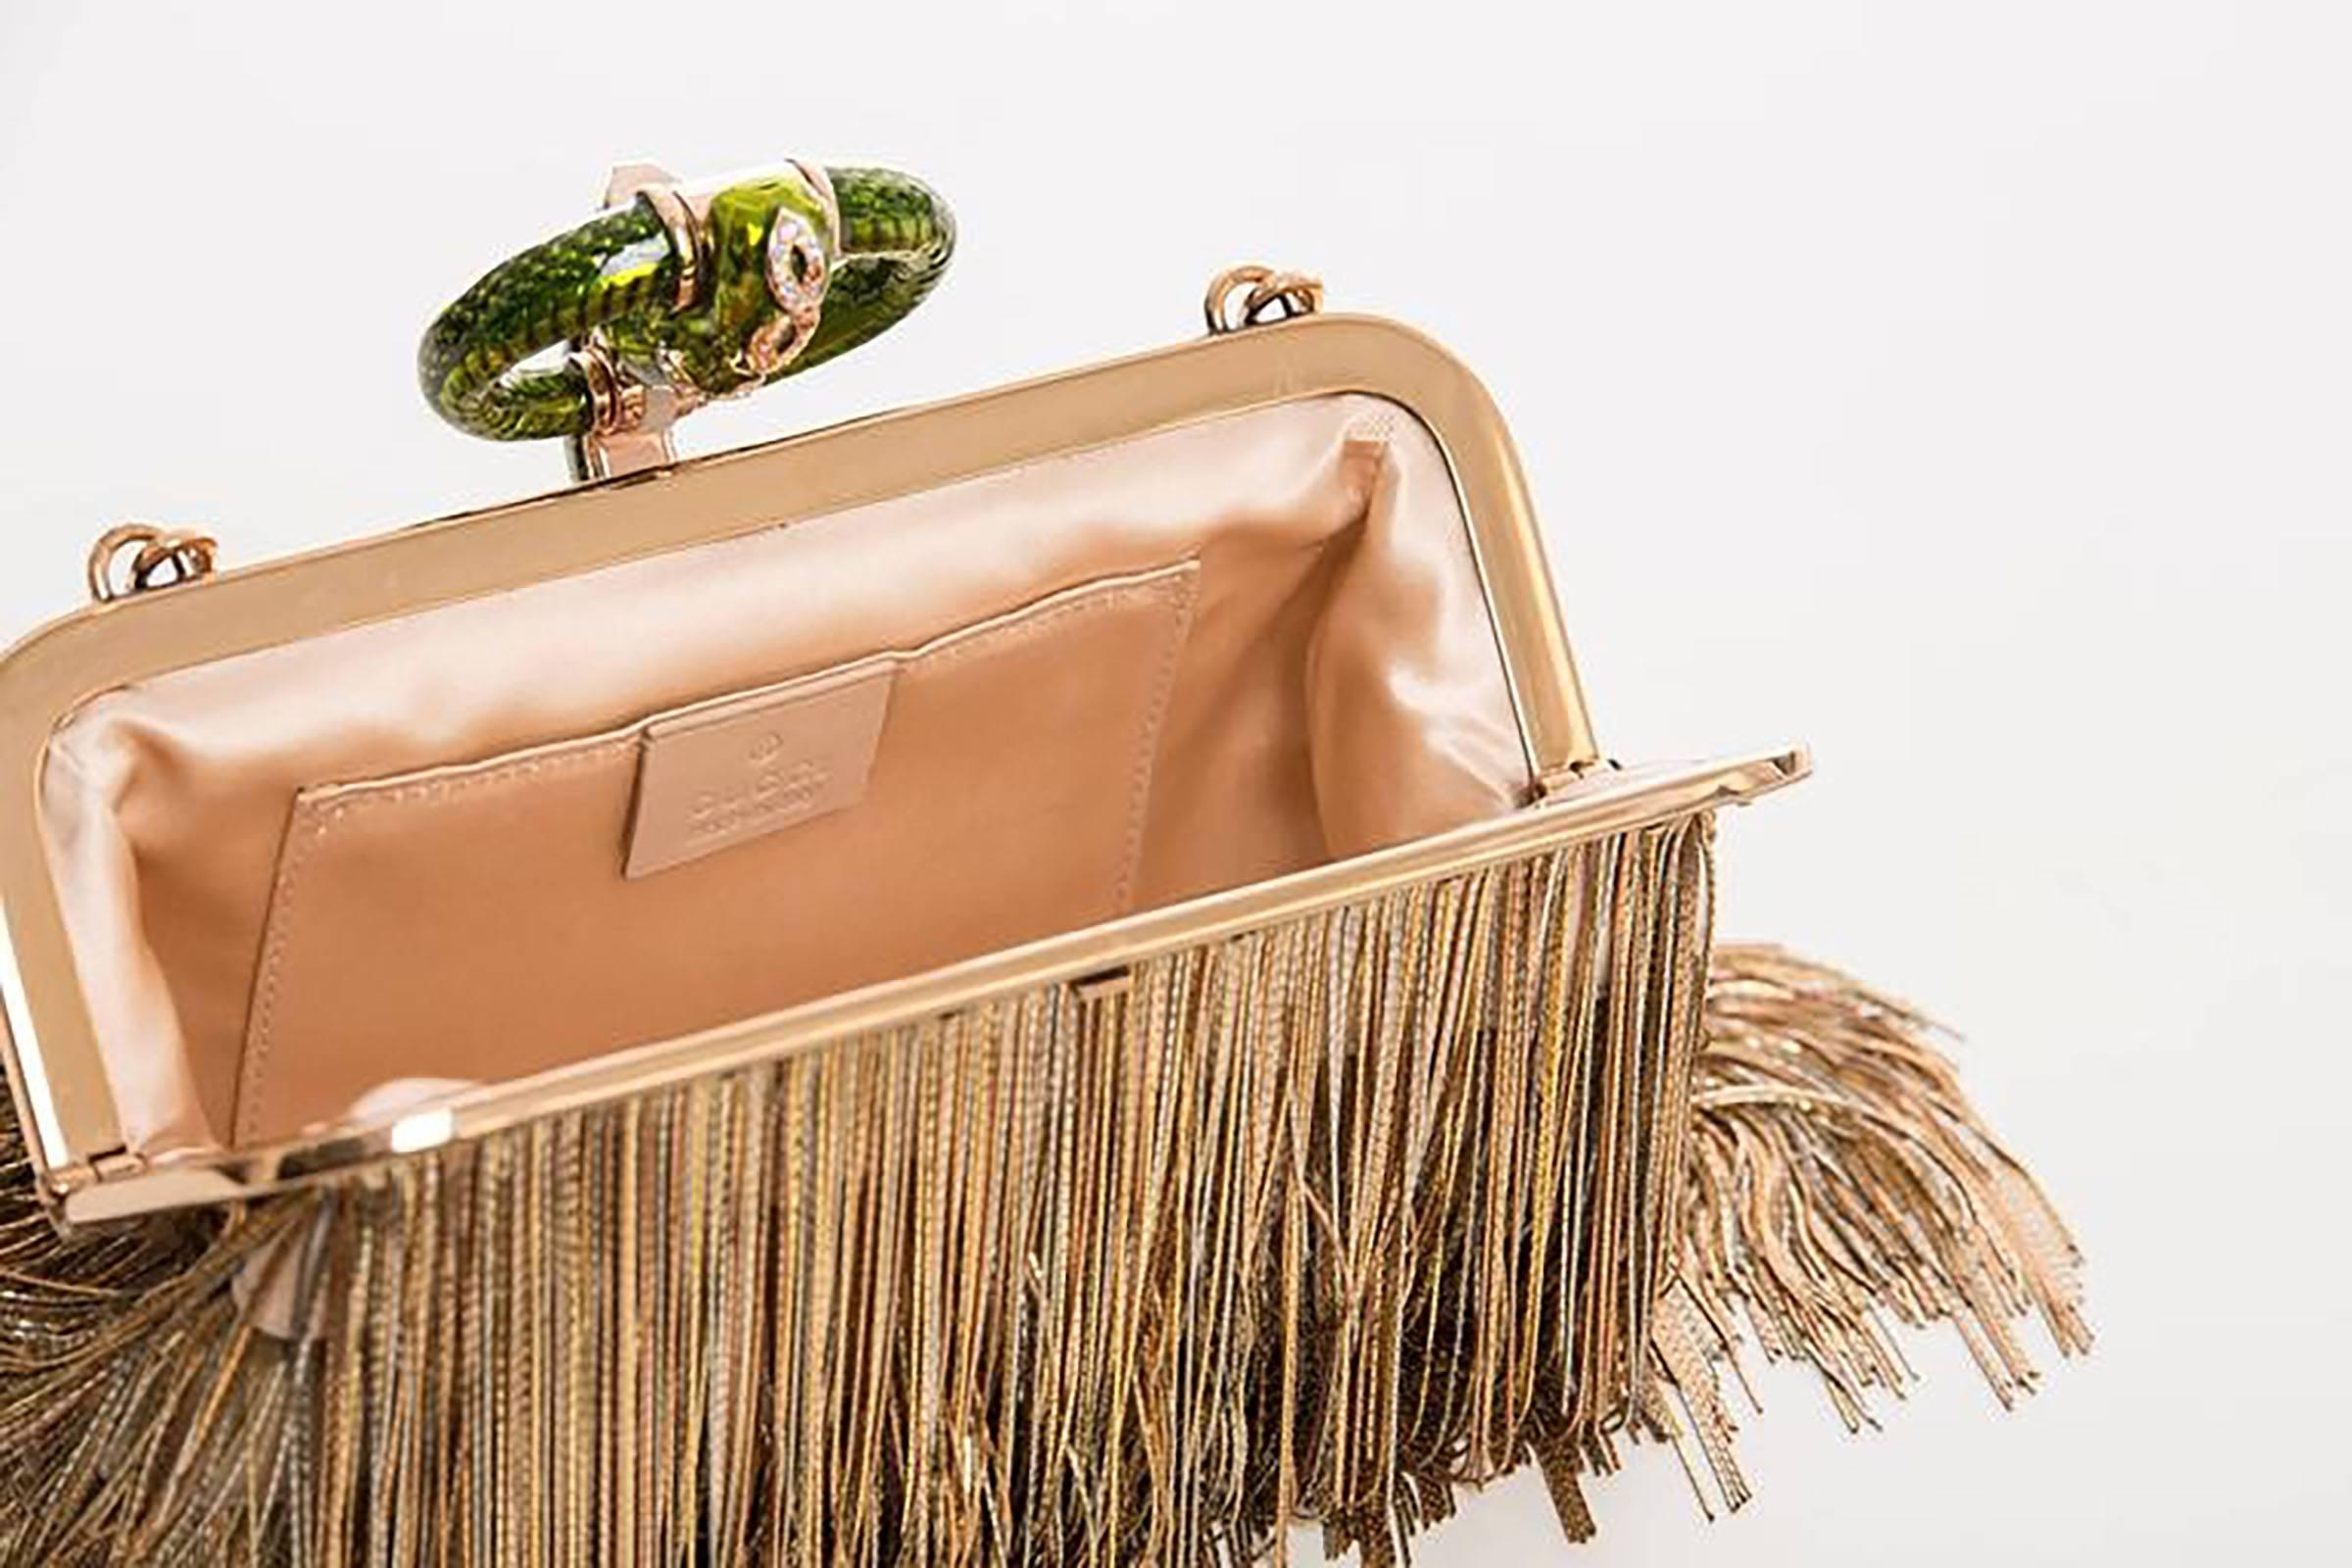 Tom Ford for Gucci Limited Edition Fringe Dragon Clutch 2